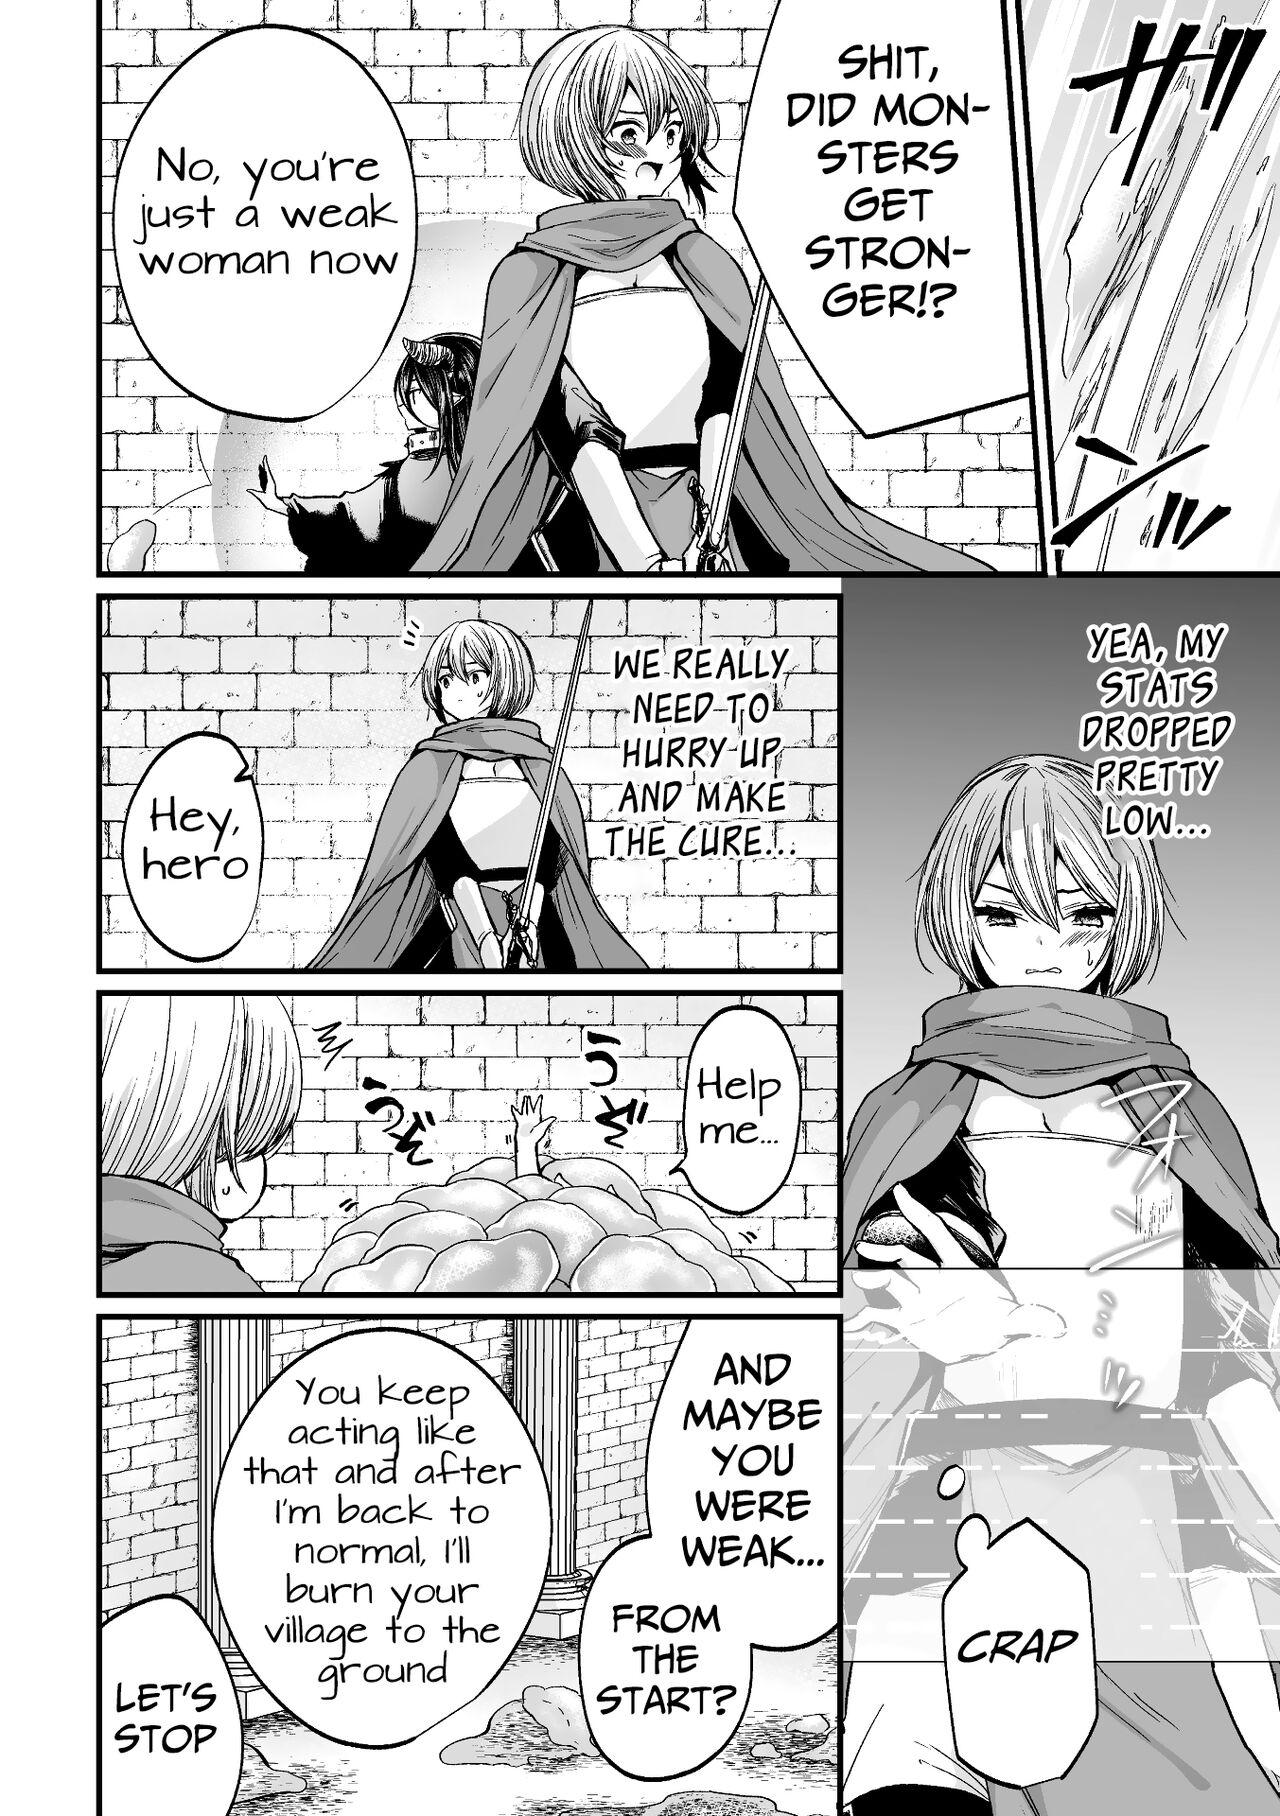 Oral Sex Gekinure! Namaiki TRAP | Rough TRAP in the Raw! - Ero trap dungeon Monster Dick - Page 4